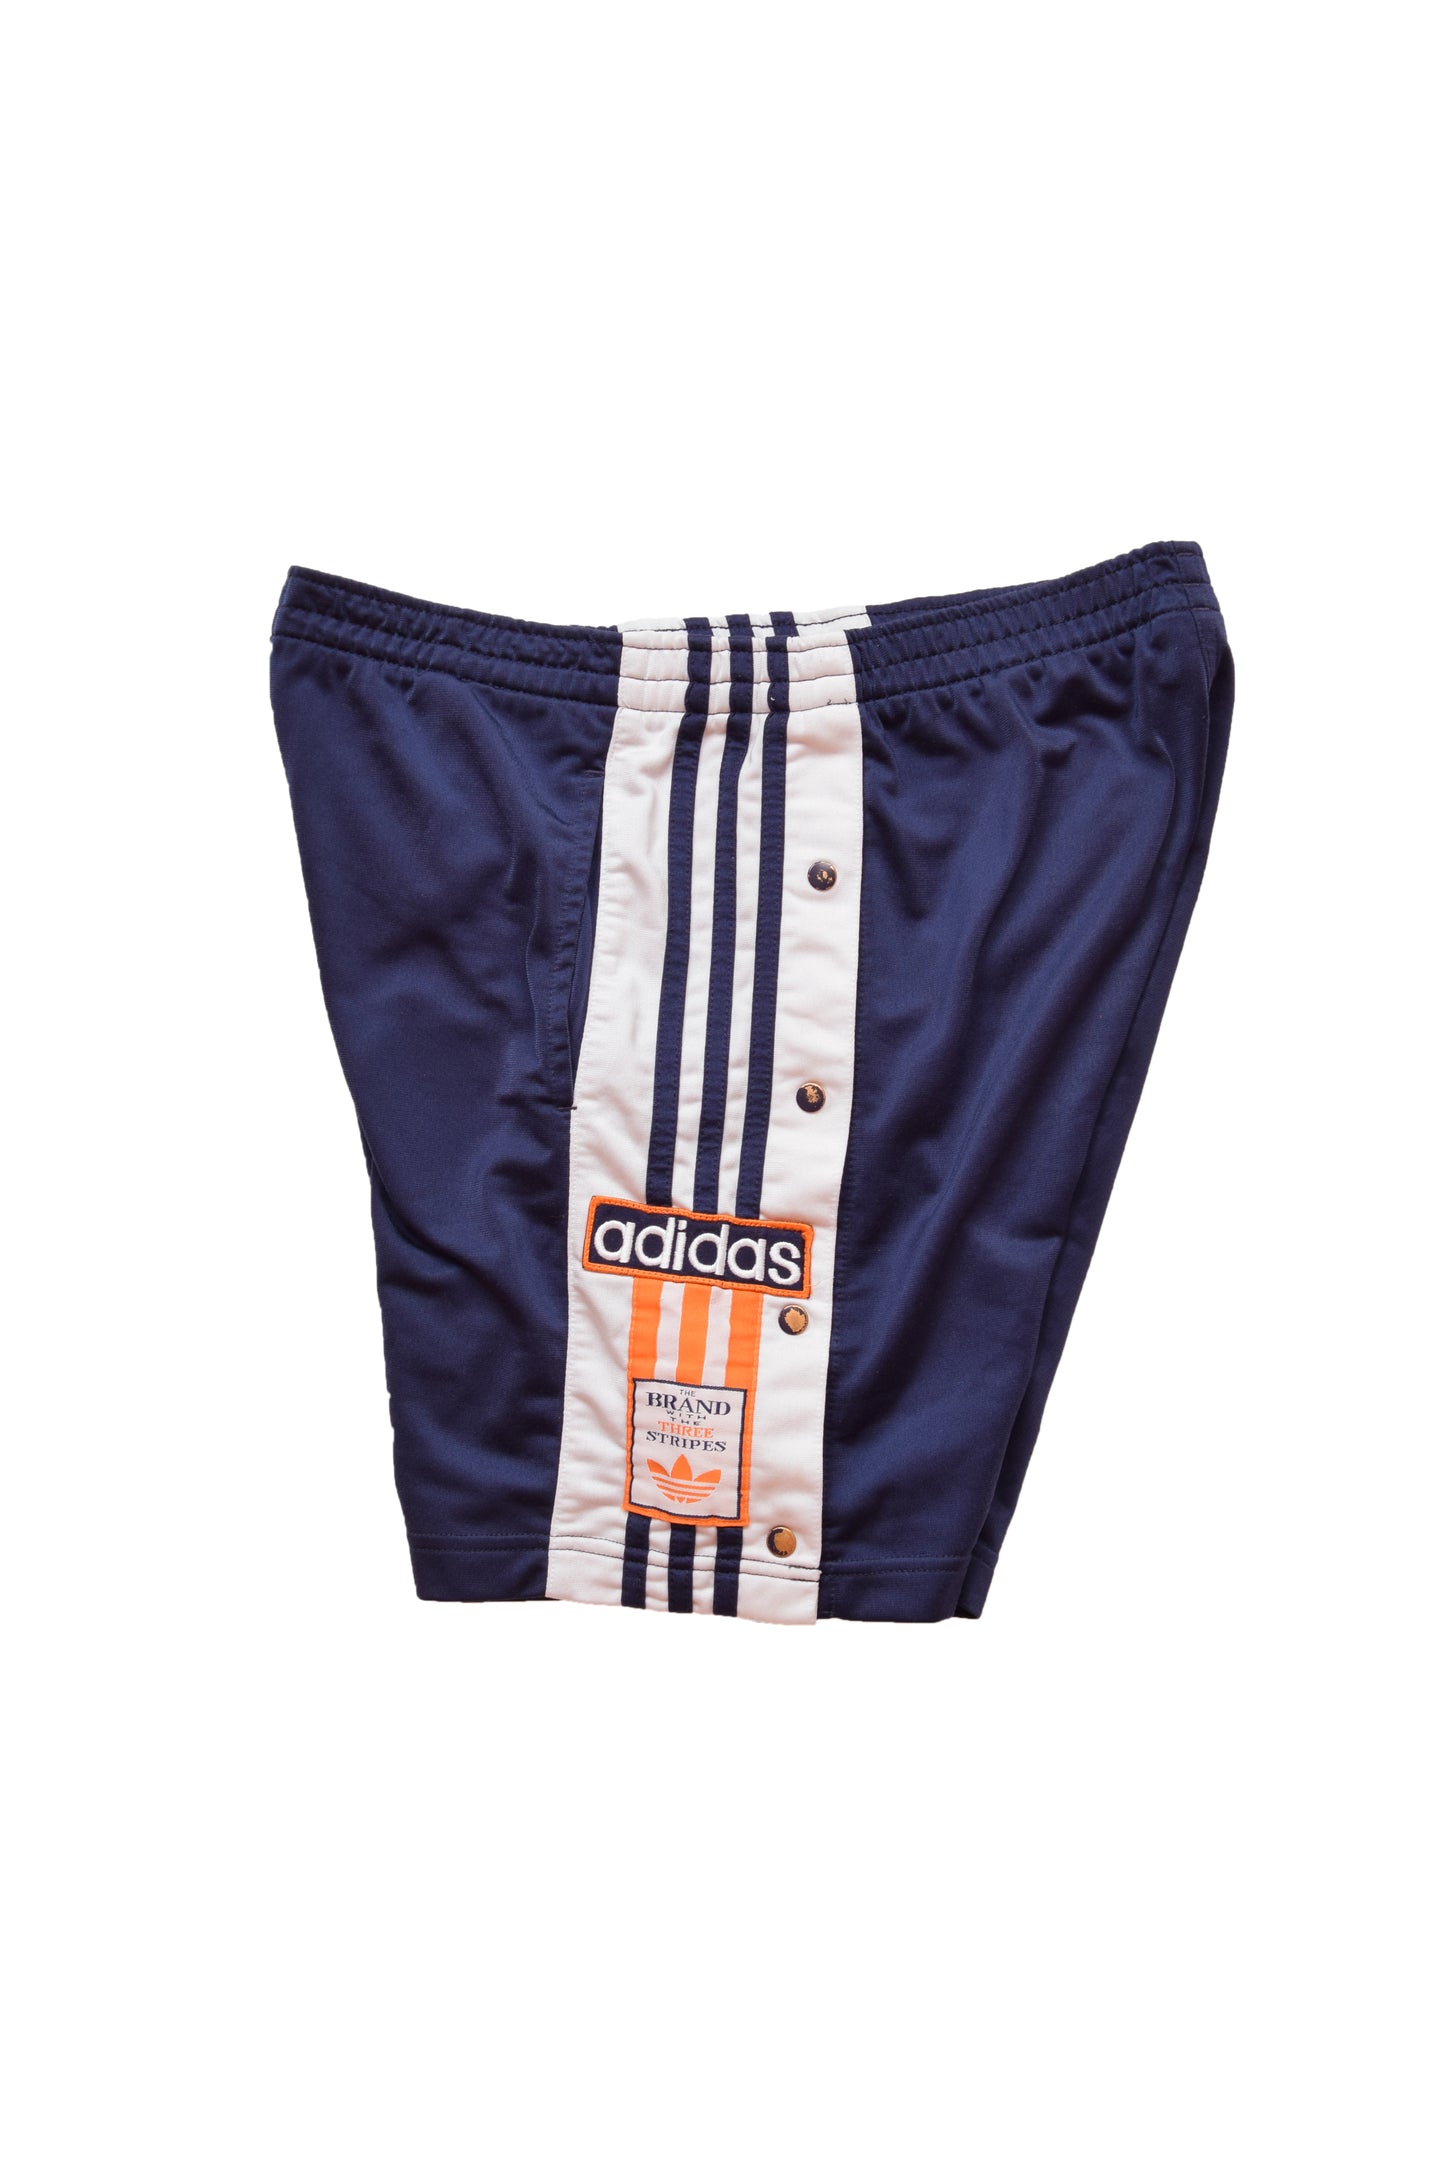 Vintage 90's Adidas Poppers Shorts with Staples